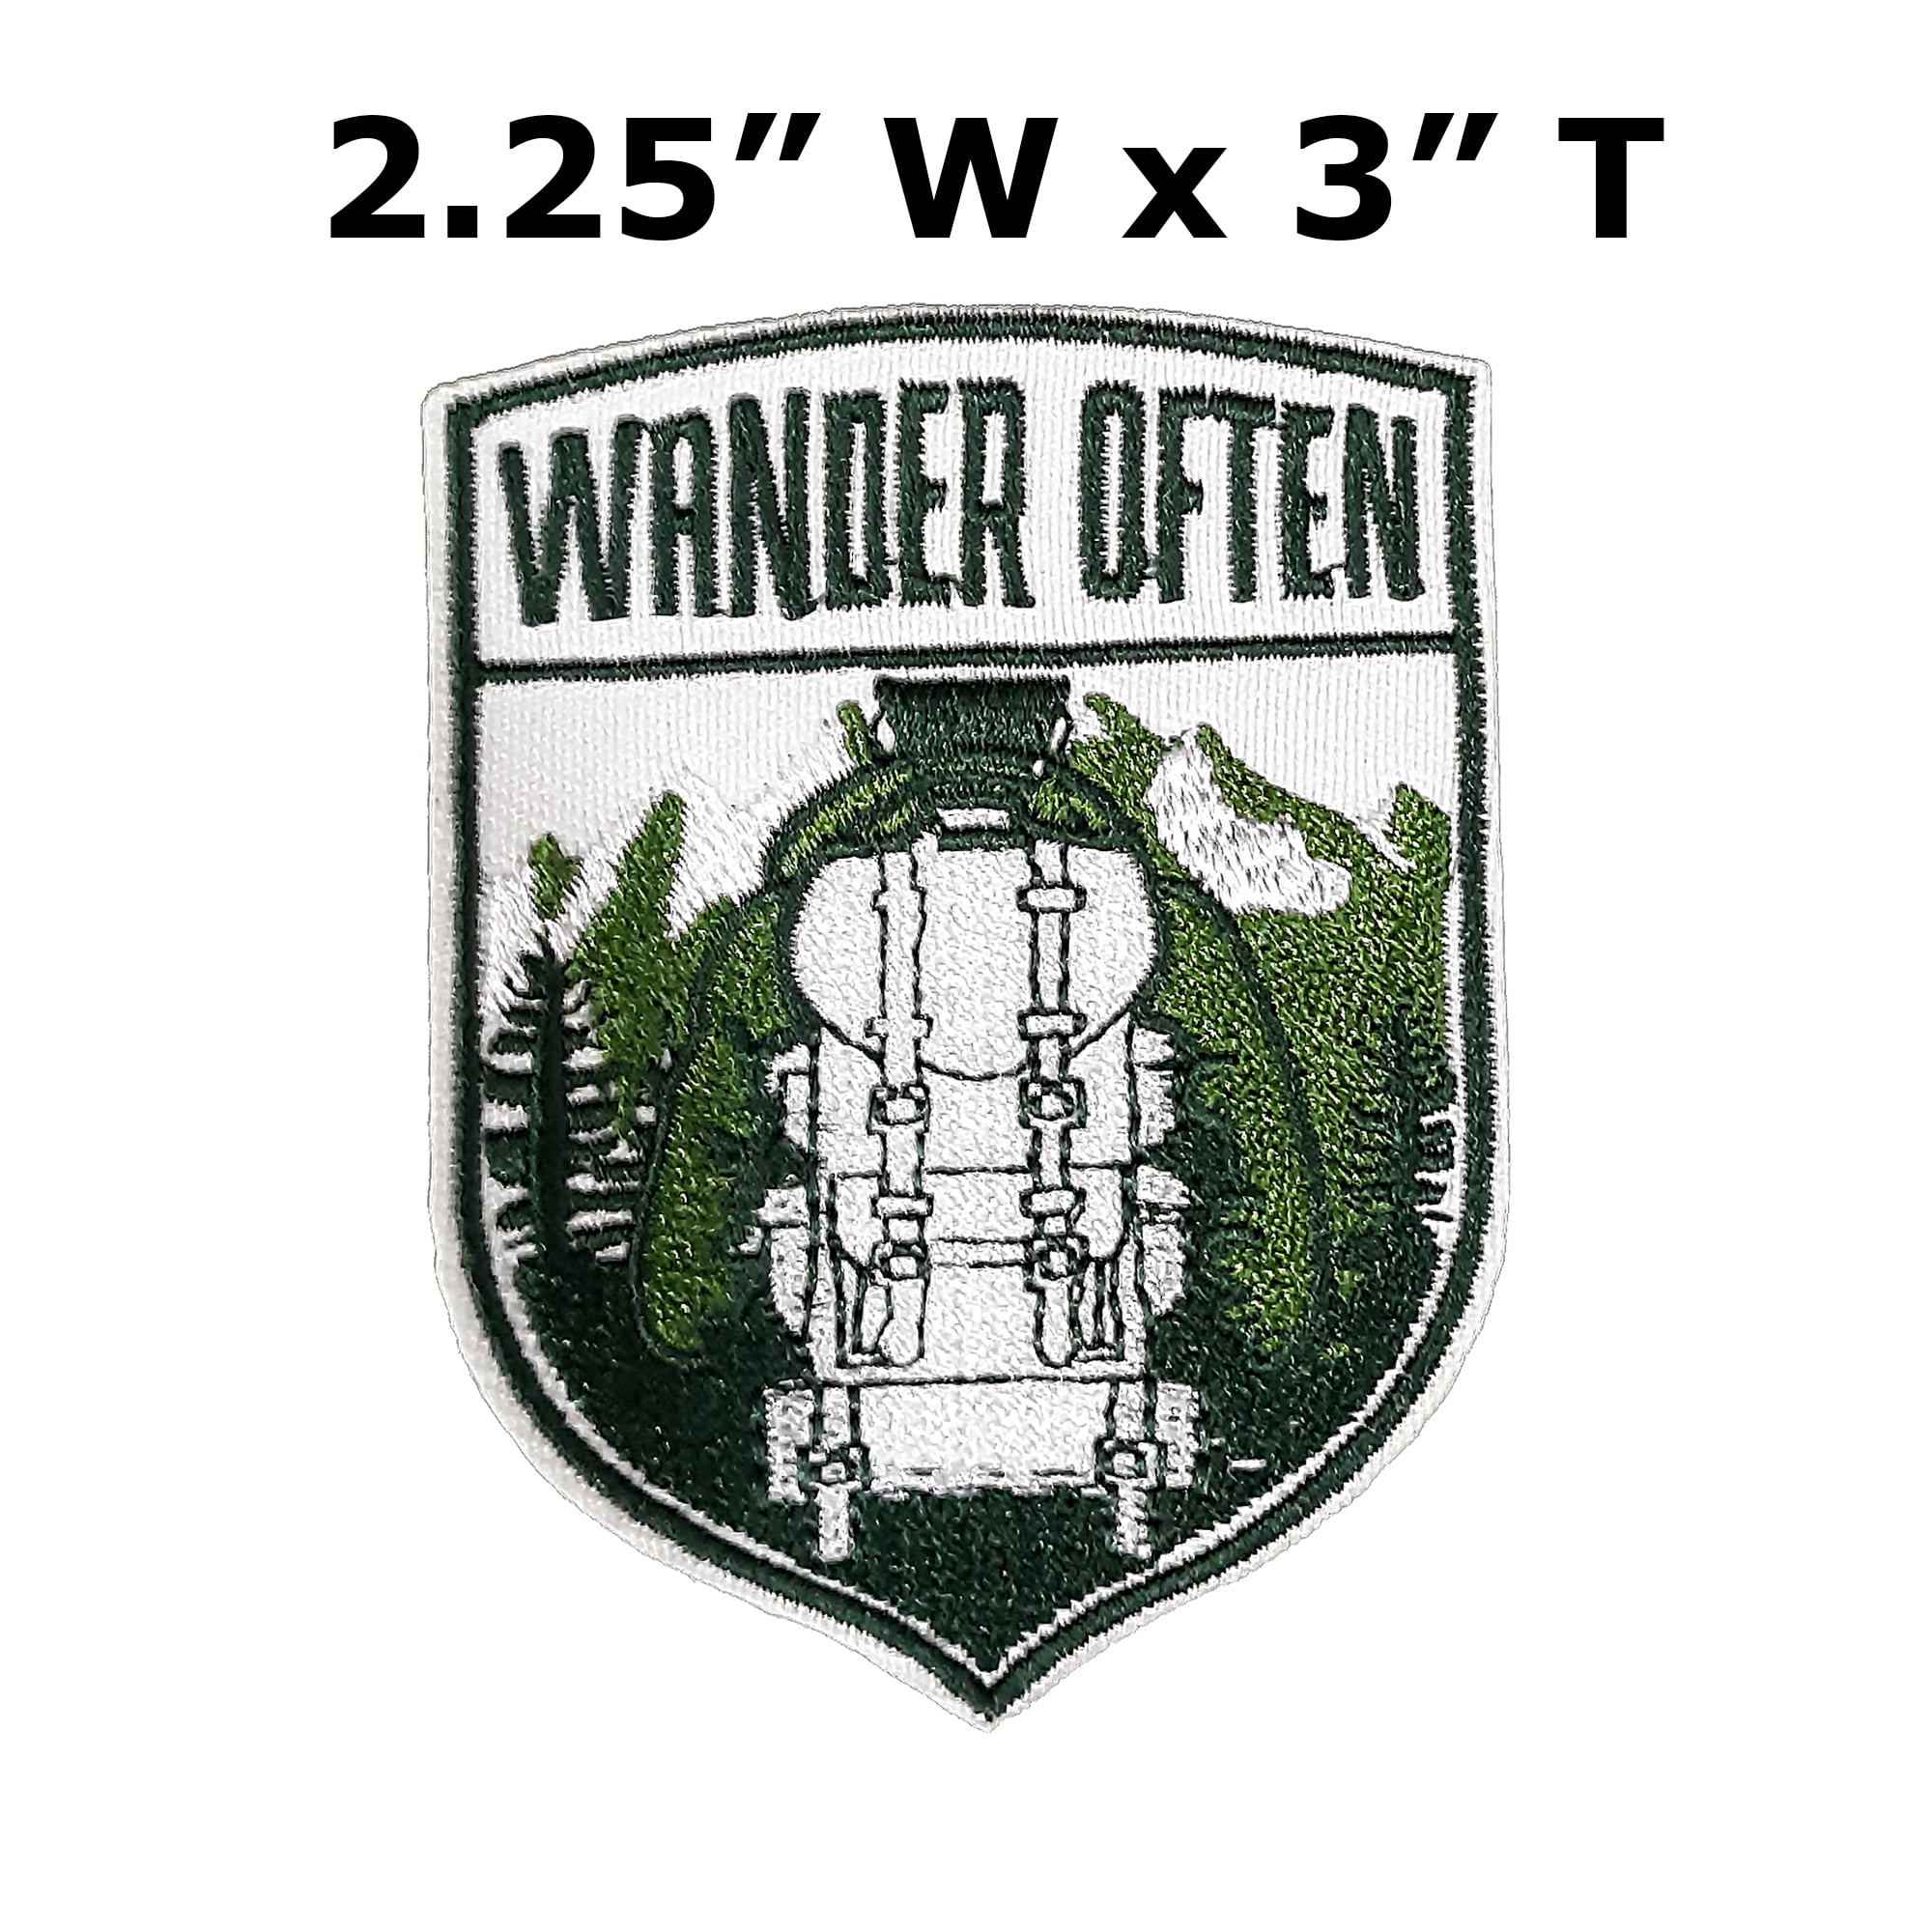 Wander Often Backpack Embroidered Patch Iron/Sew-On Applique Travel Souvenir